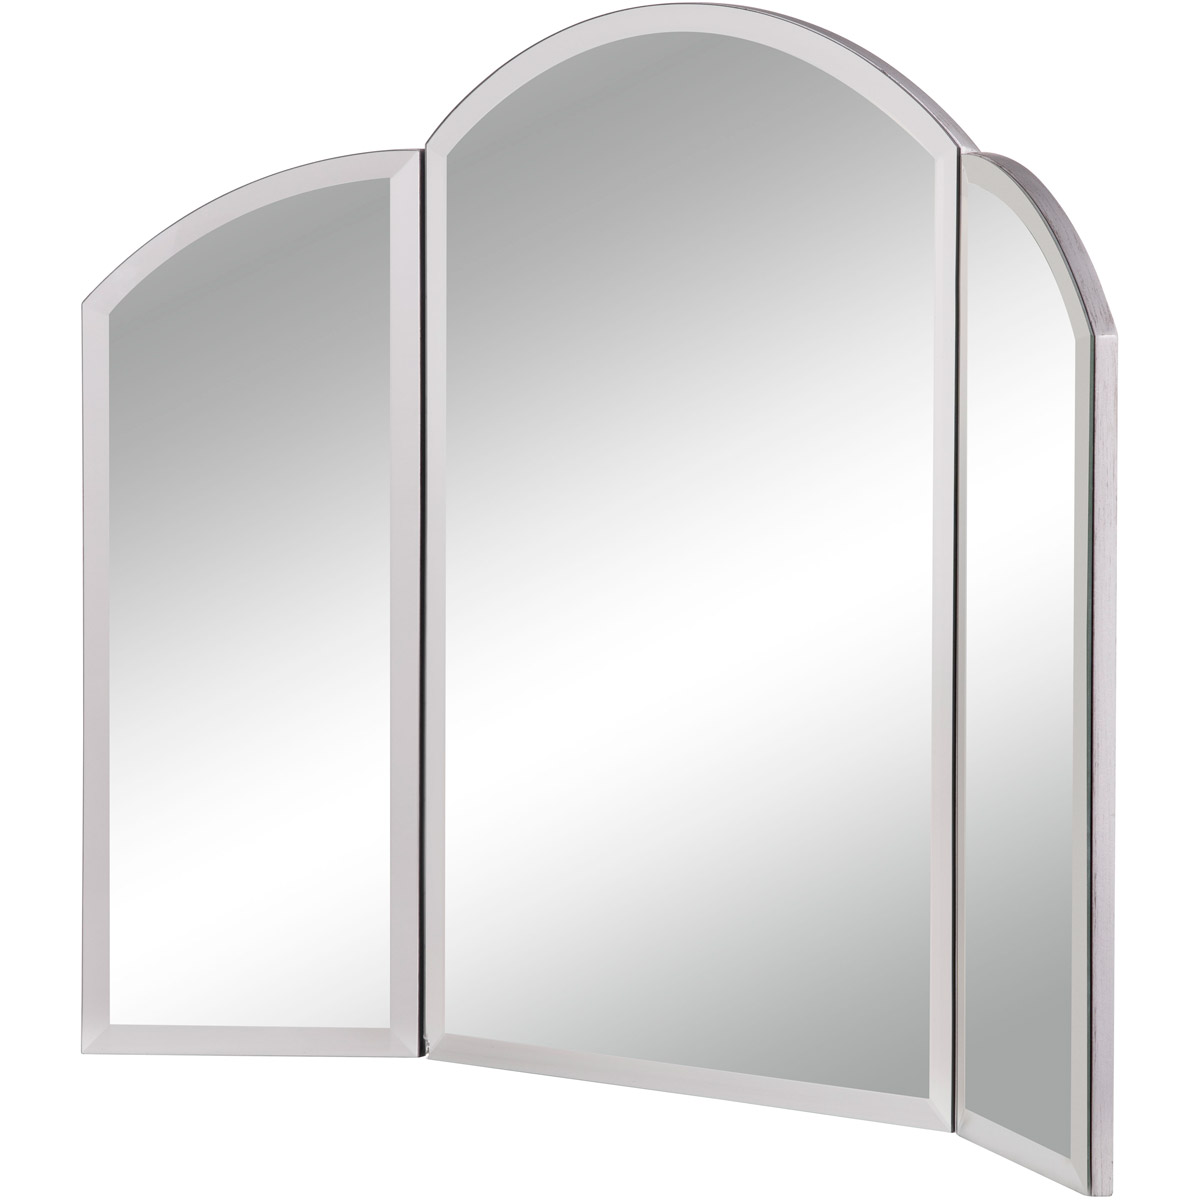 Mf6-1039s Dressing Mirror Clear Mirror Hand Rubbed, Antique Silver - 32 X 24 In.